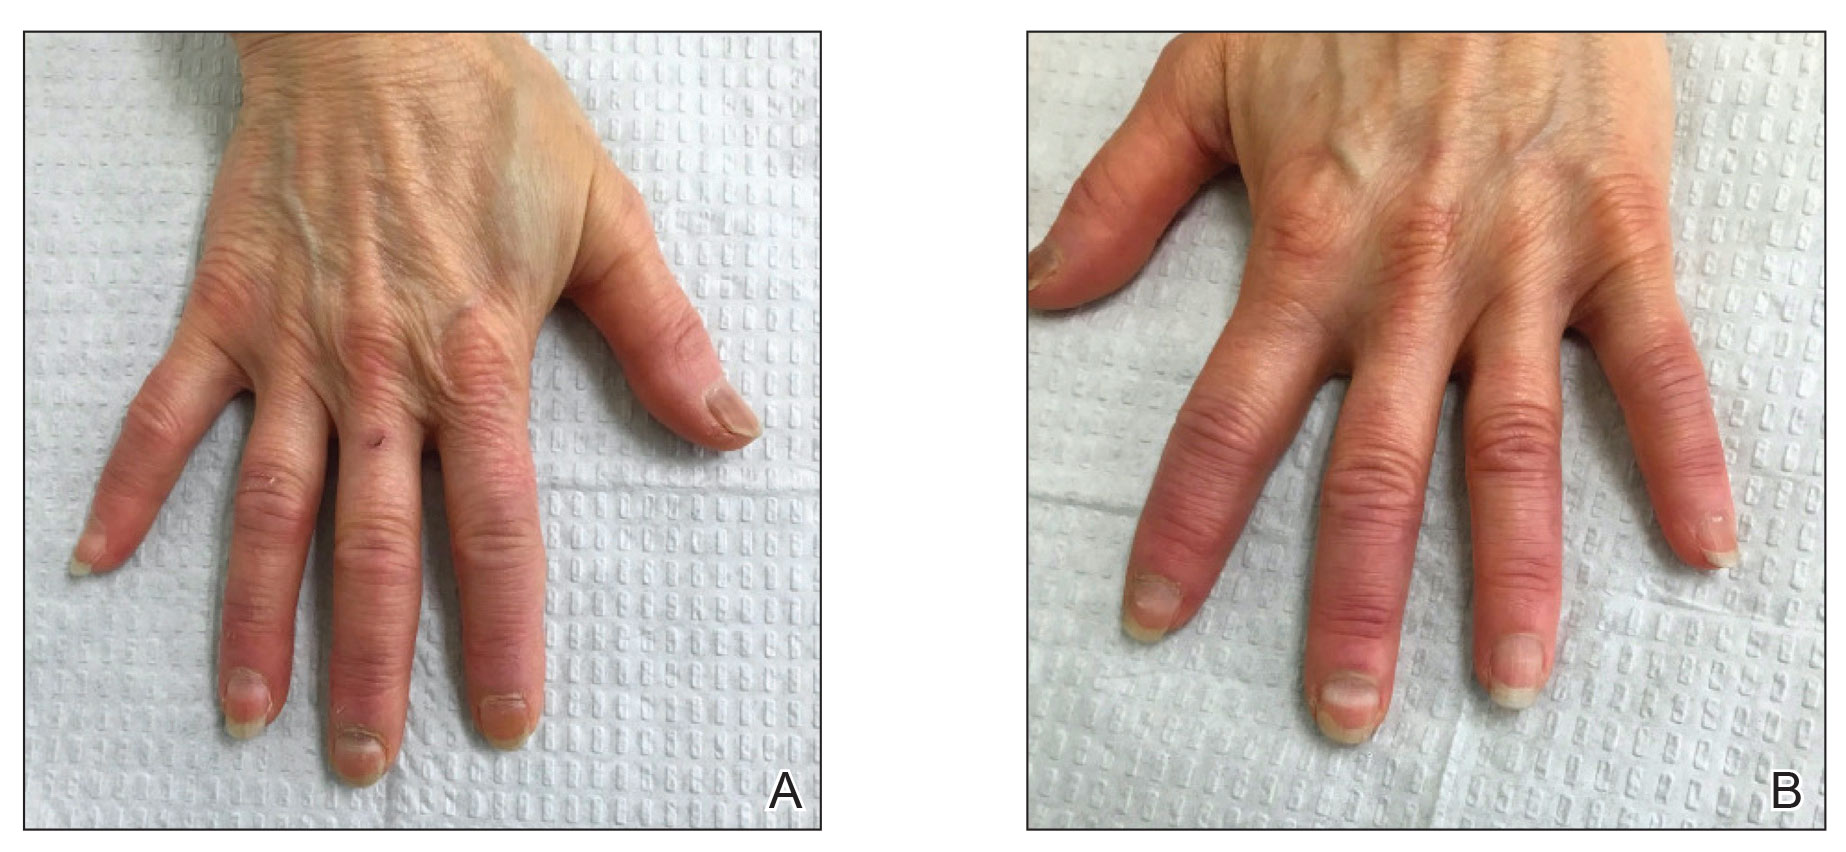 Transverse leukonychia (Mees’ lines) 5 days after the second dose of the Pfizer-BioNTech COVID-19 messenger RNA vaccine (right hand and left hand, respectively).